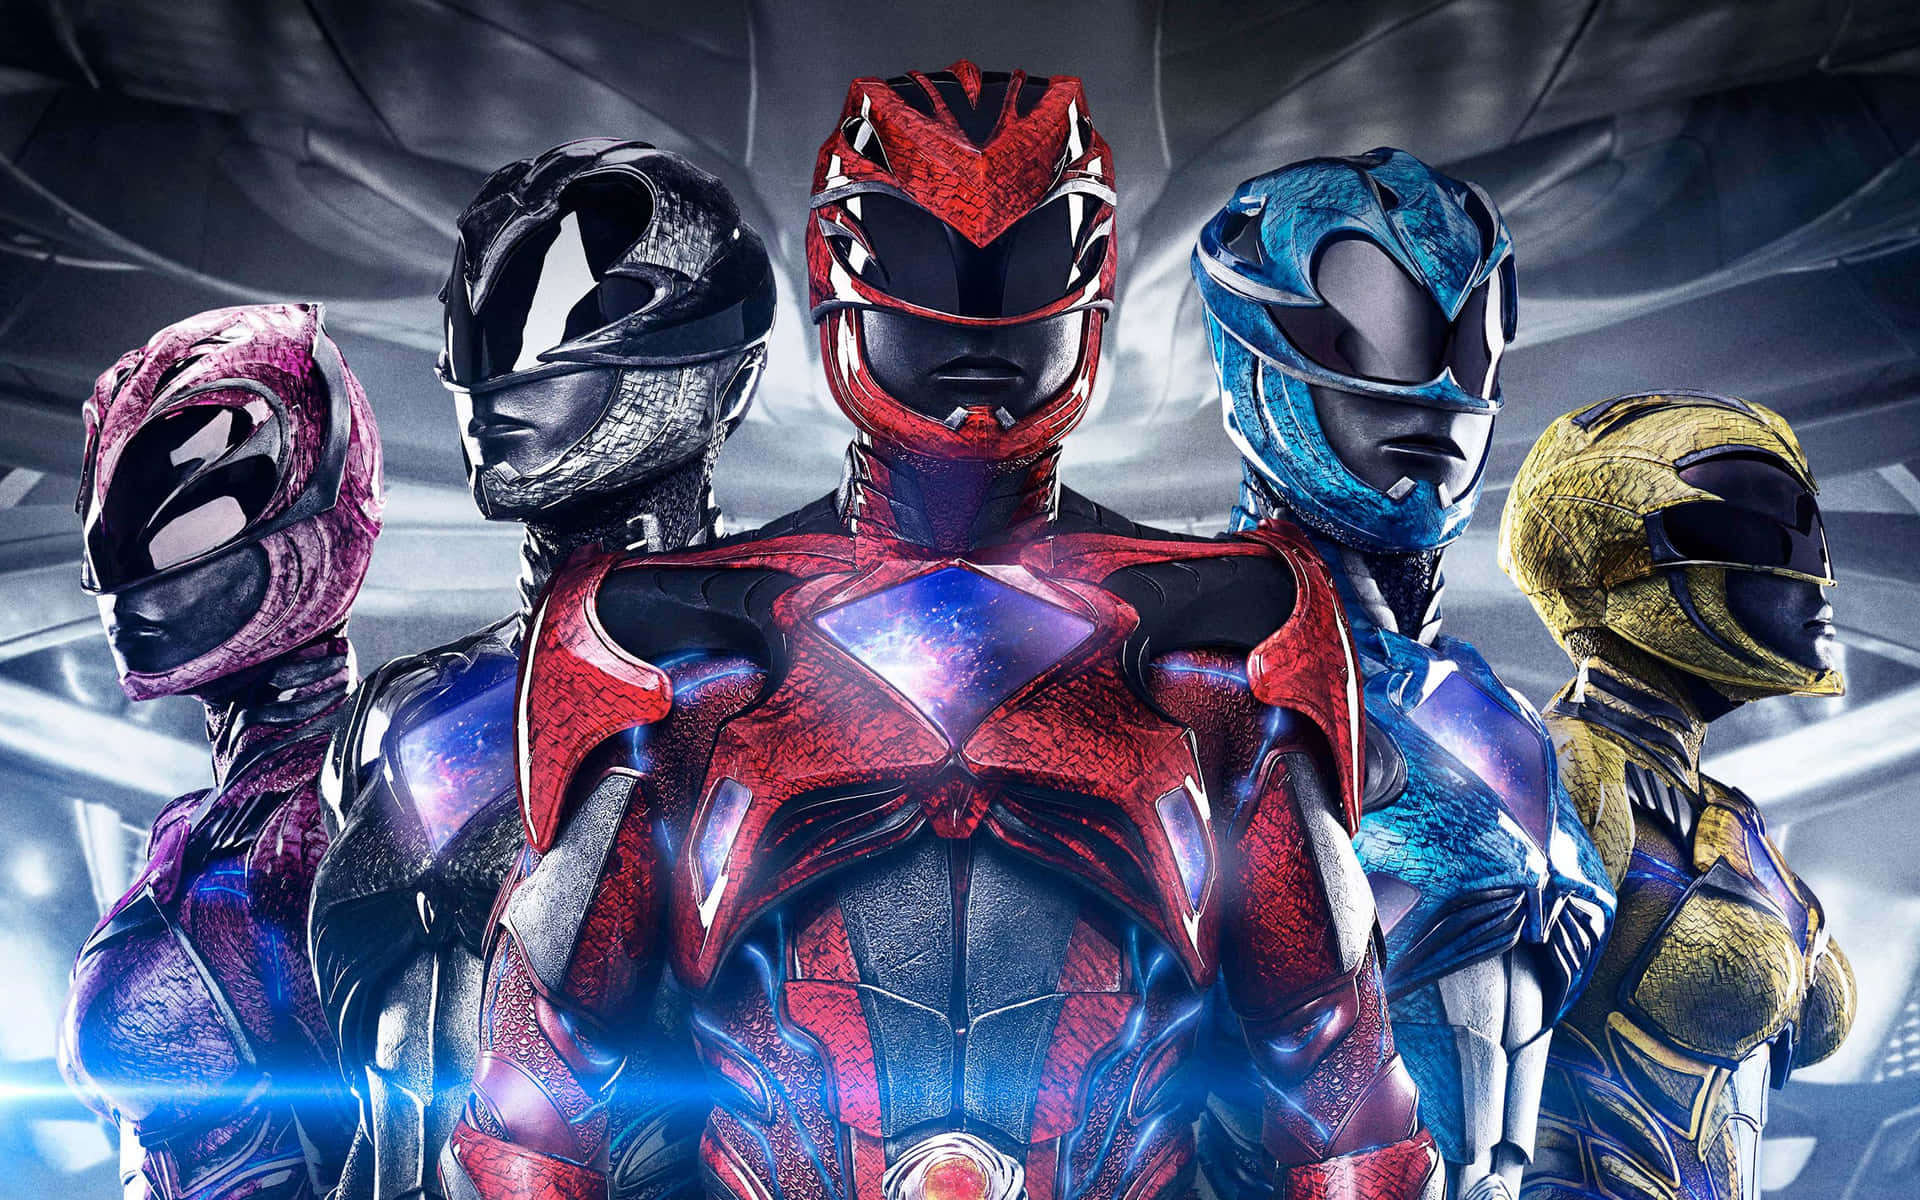 Imighty Power Rangers Pronti All'azione.